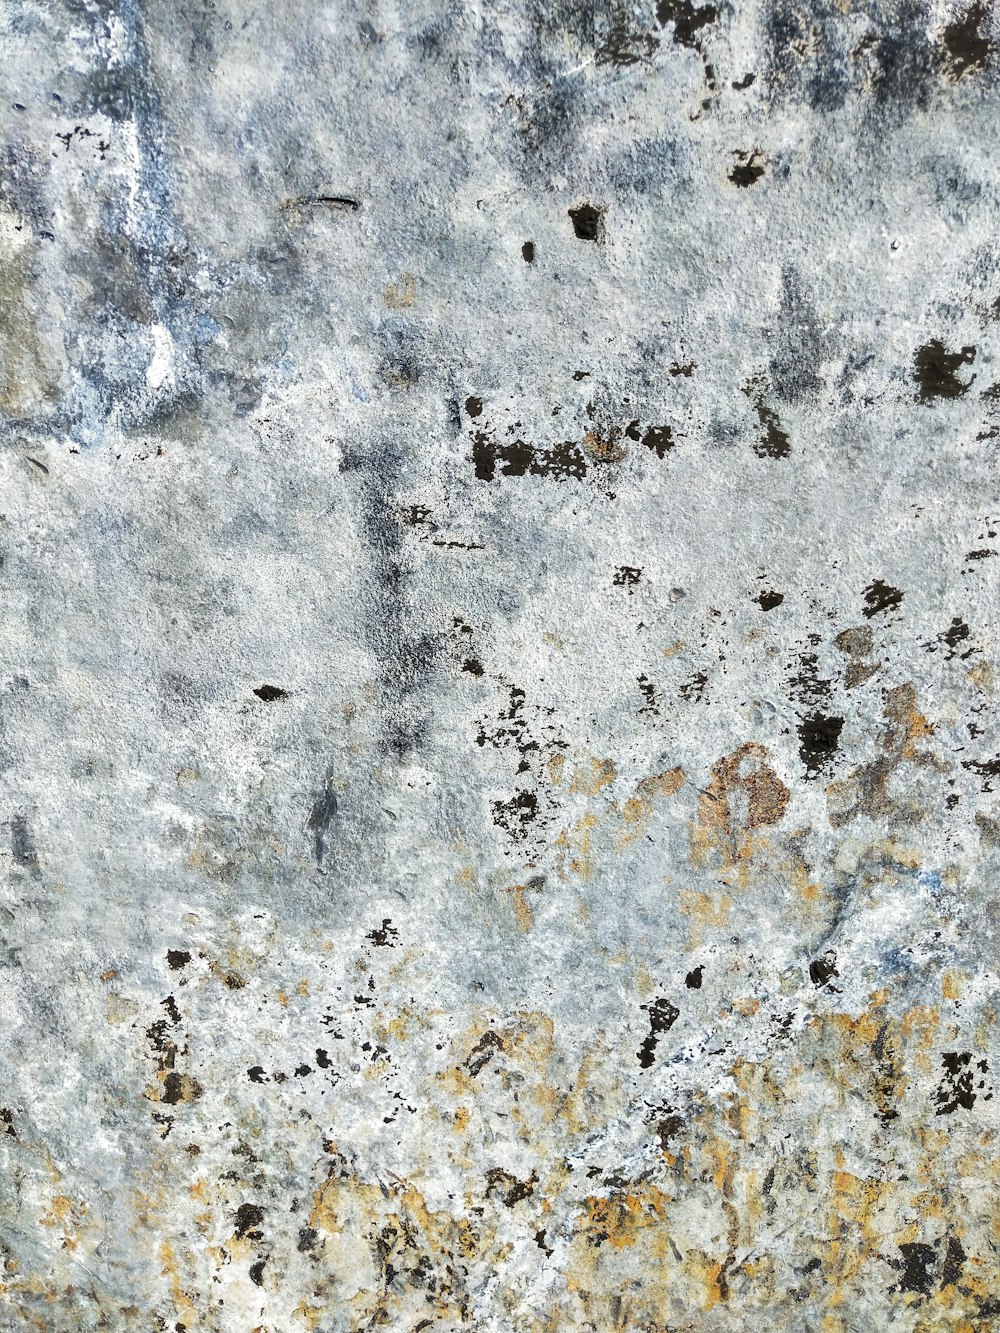 a close up of a concrete wall with a rusted surface